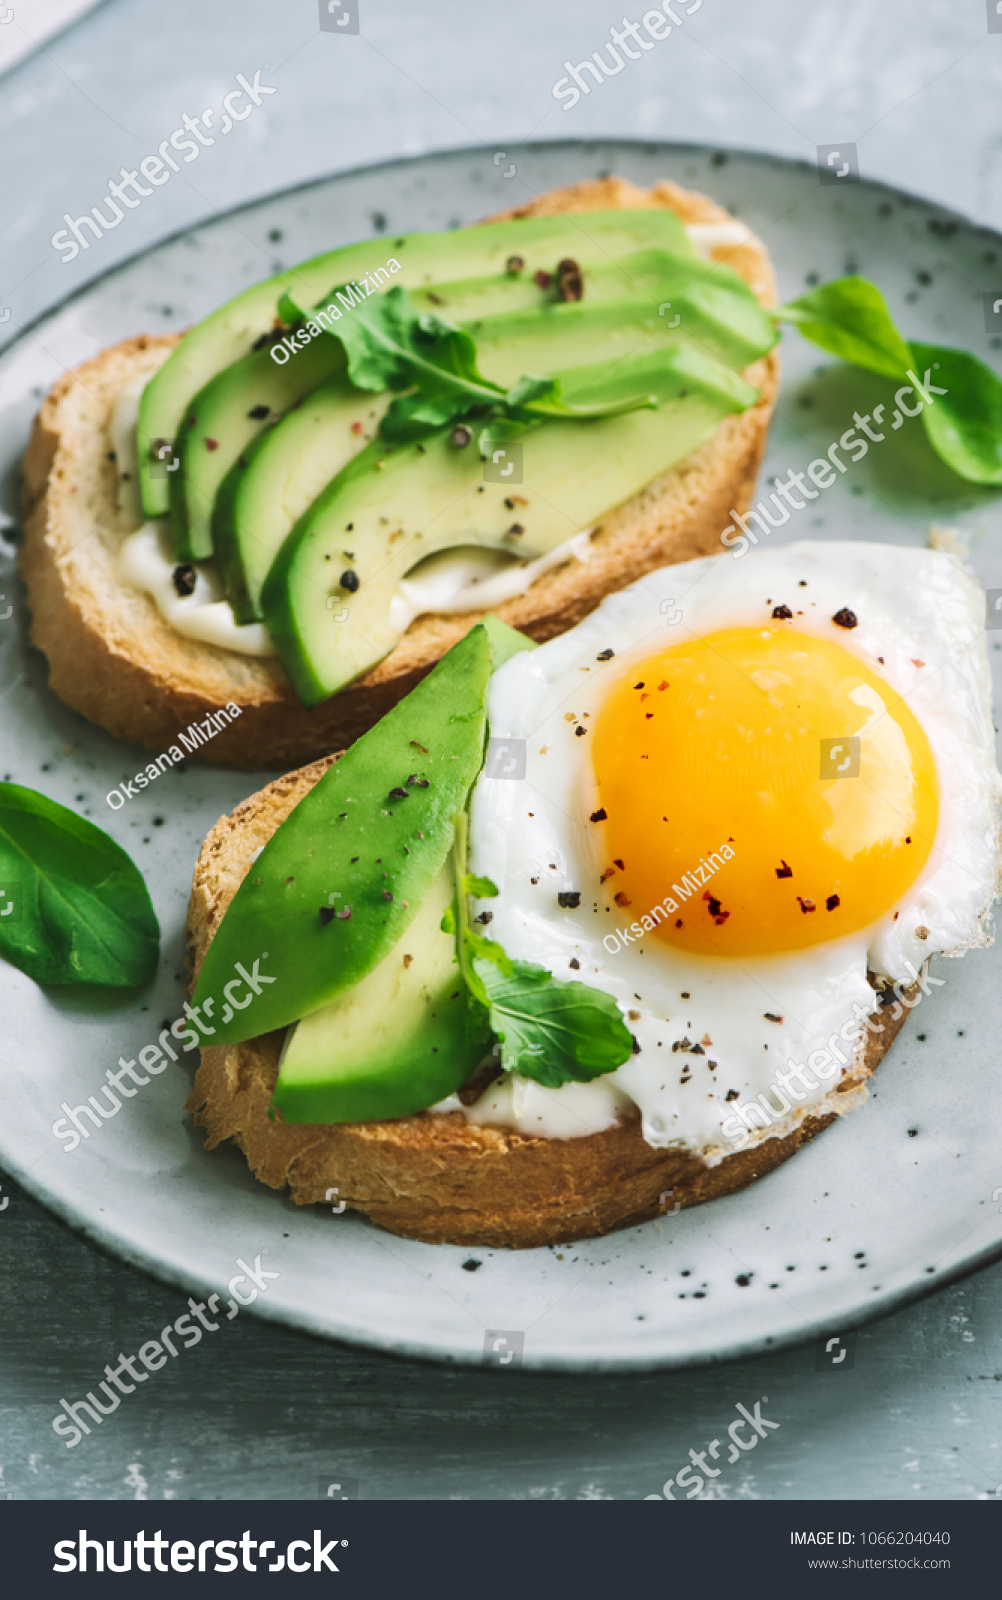 Avocado Sandwich with Fried Egg - sliced avocado and  egg on toasted bread with arugula for healthy breakfast or snack. #1066204040